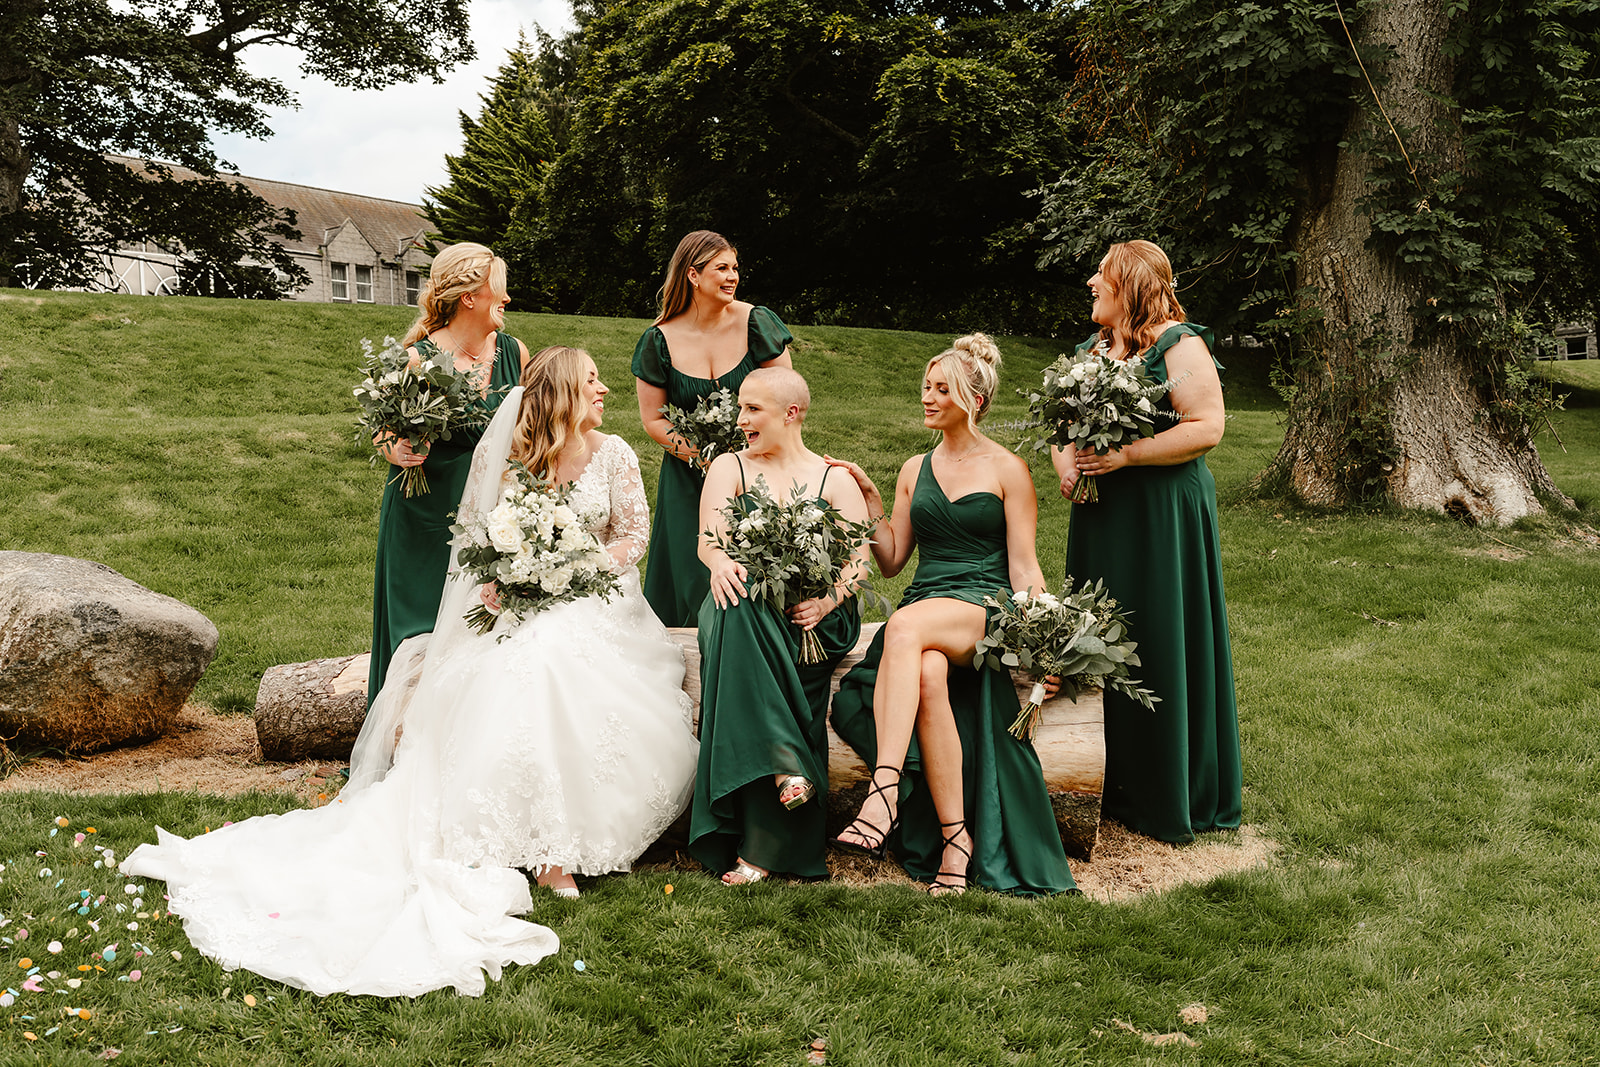 Bride sitting with her bridesmaids wearing green dresses